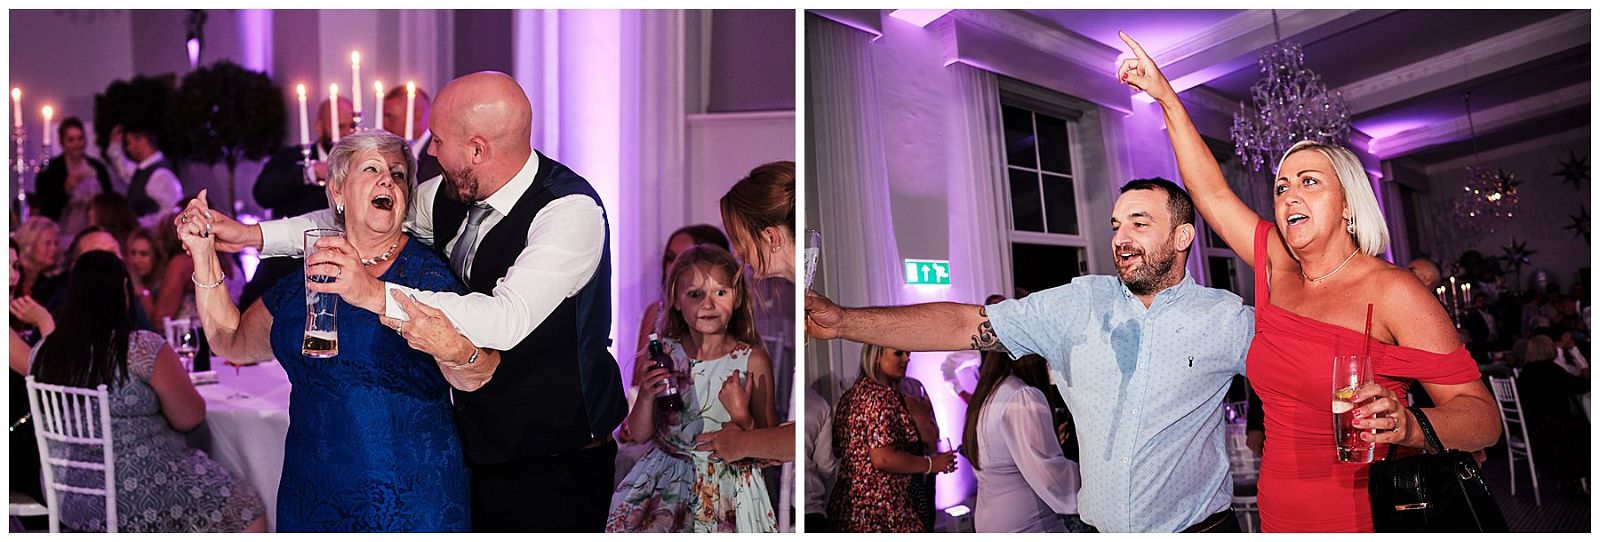 Our bride changed into a party dress, it was time to seriously get the party going at Hawkstone Hall in Shrewsbury by Documentary Wedding Photographer Stuart James